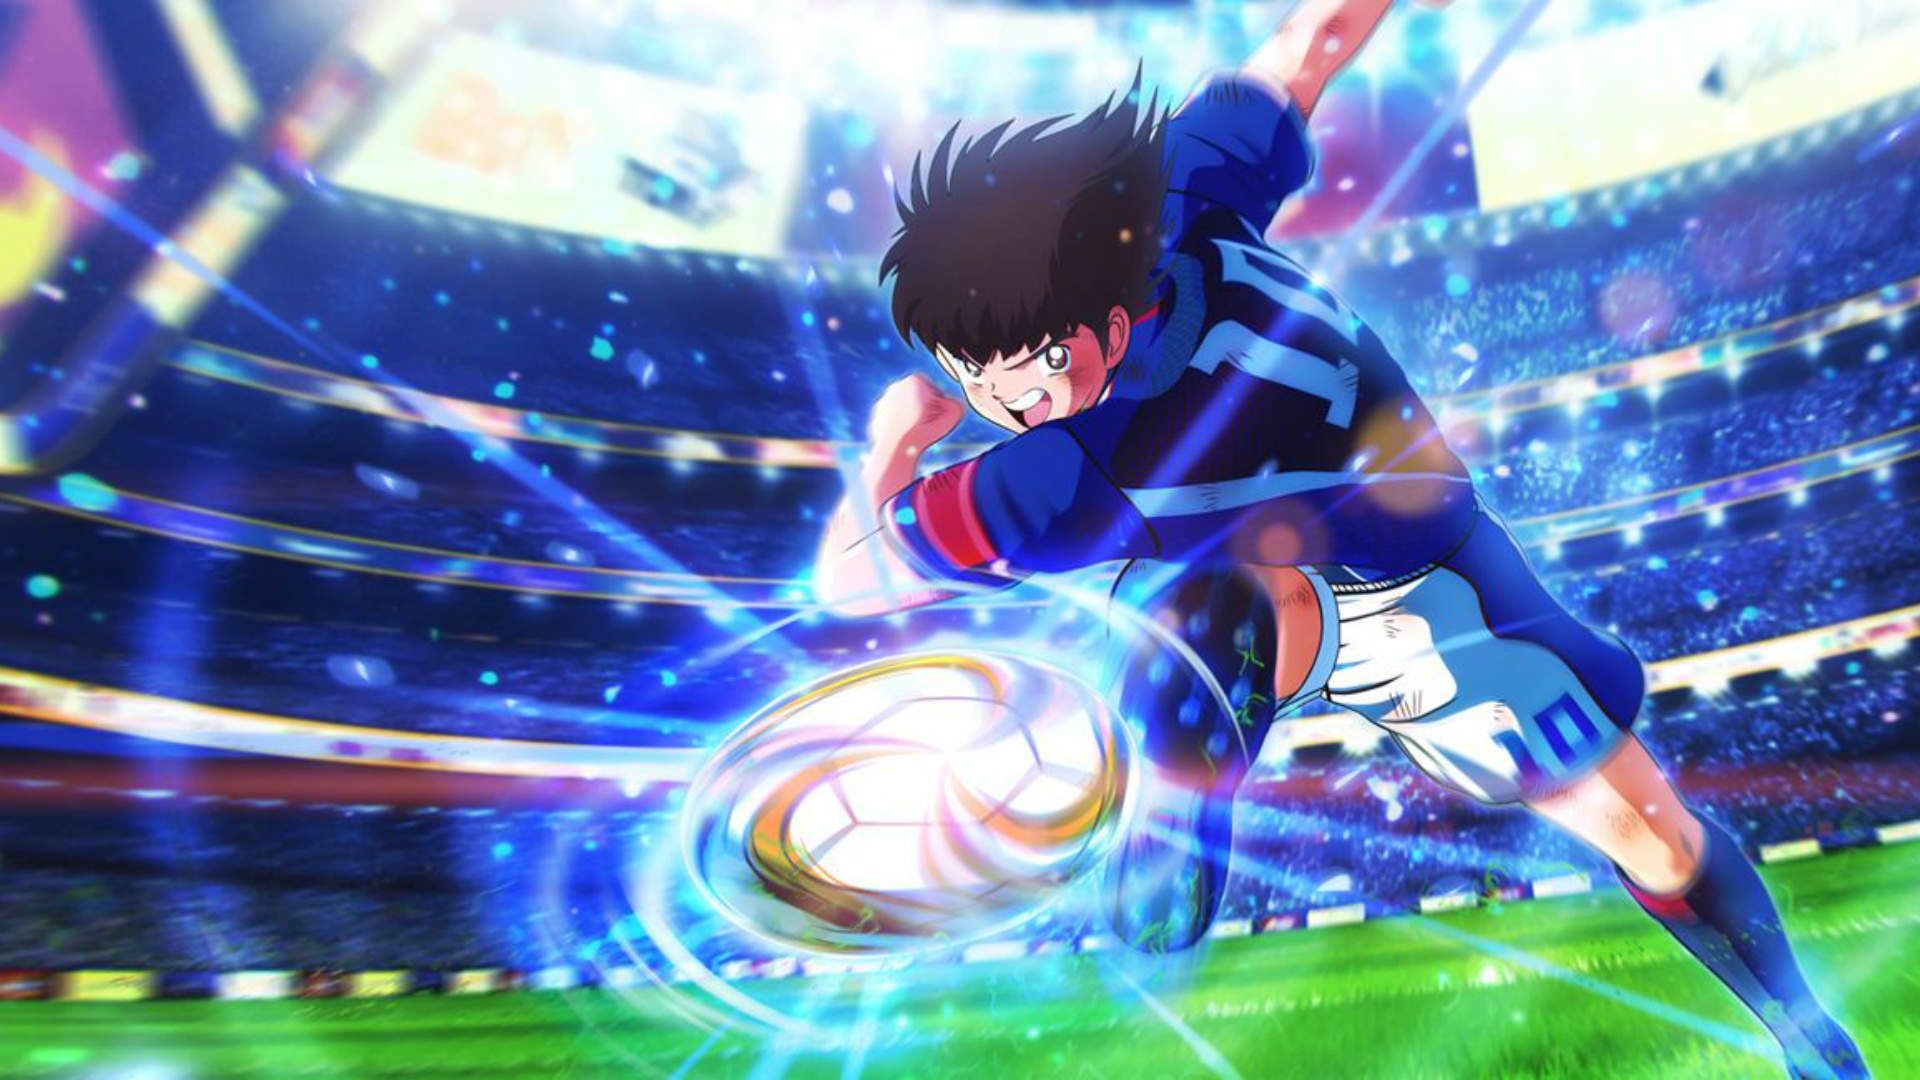 Captain Tsubasa Giving FIFA Much Needed Competition With Super